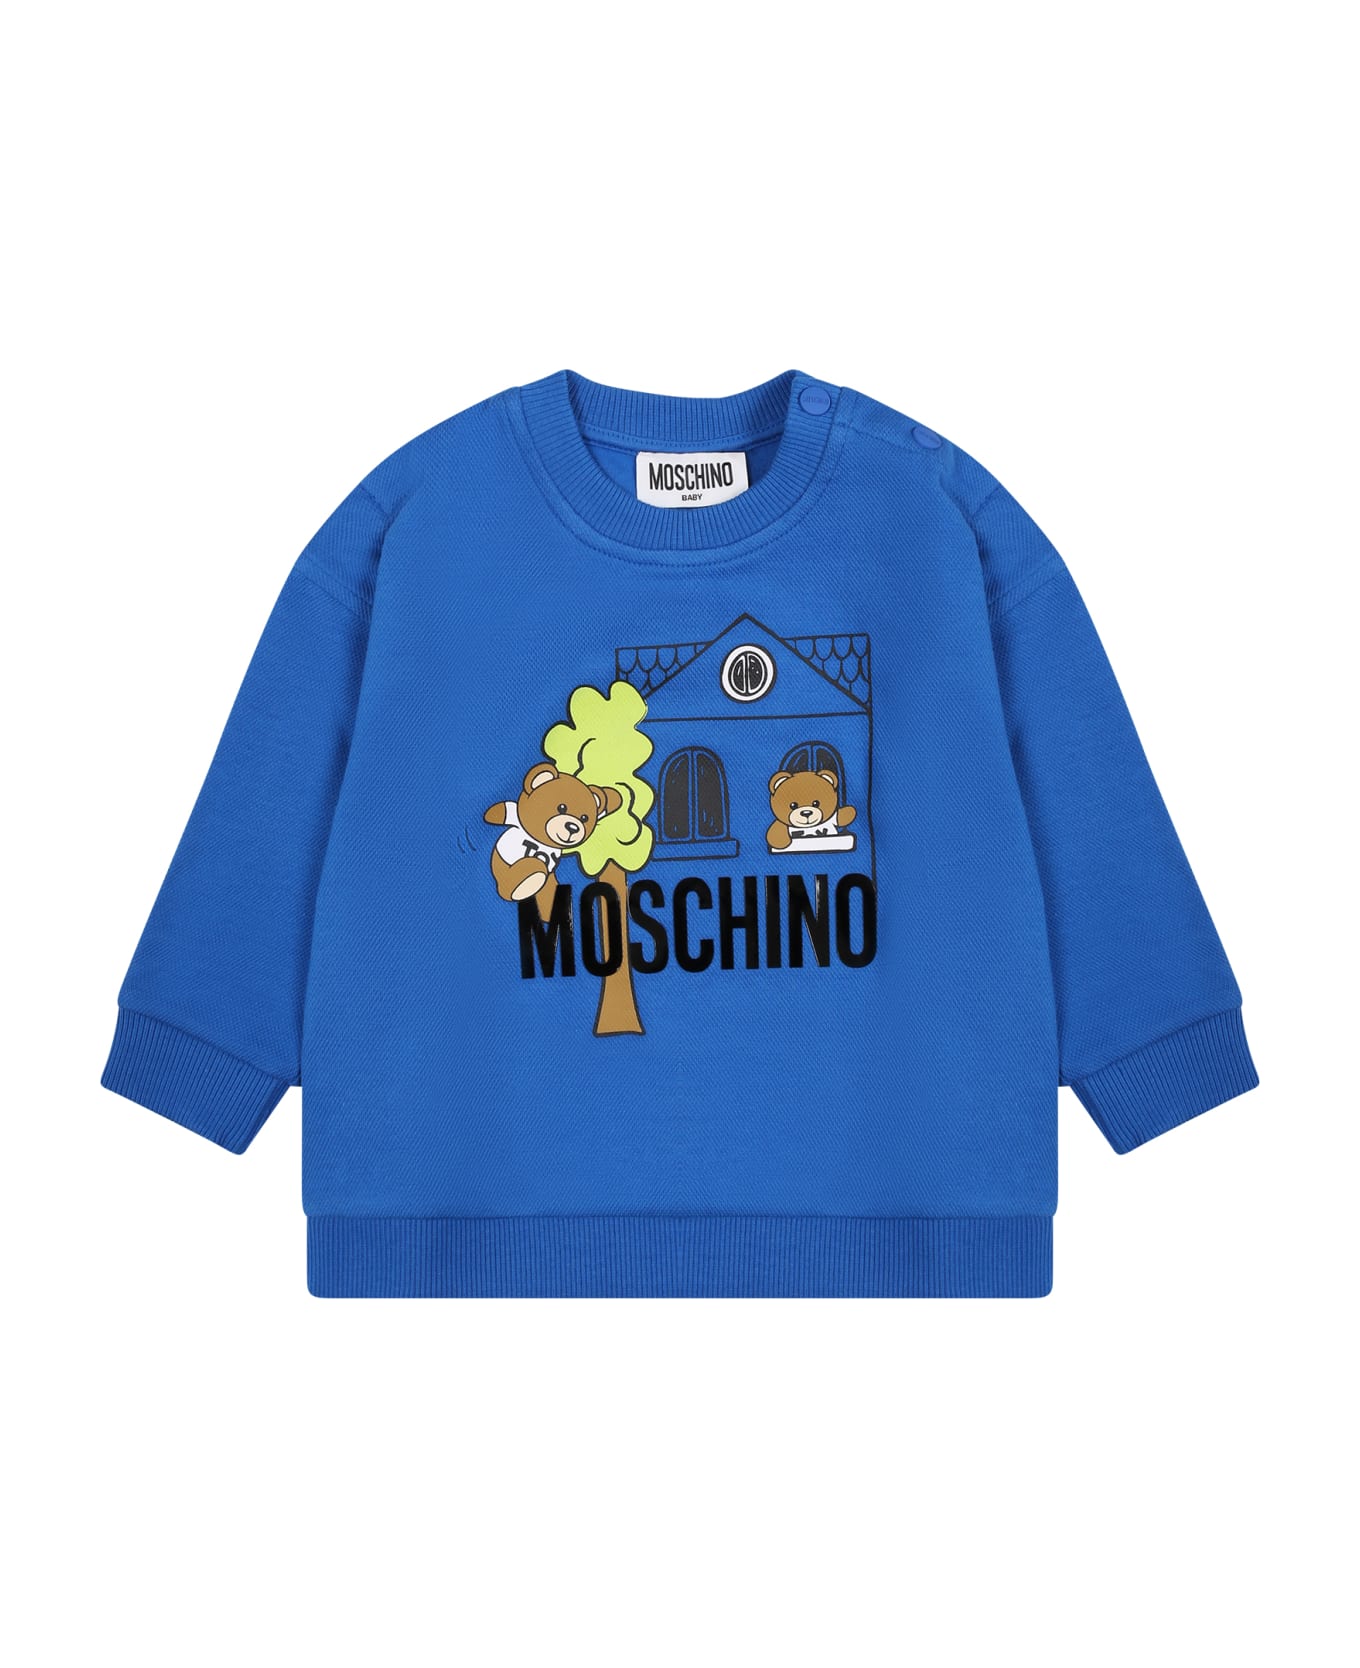 Moschino Blue Sweatshirt For Baby Boy With Teddy Bears And Logo - Blue